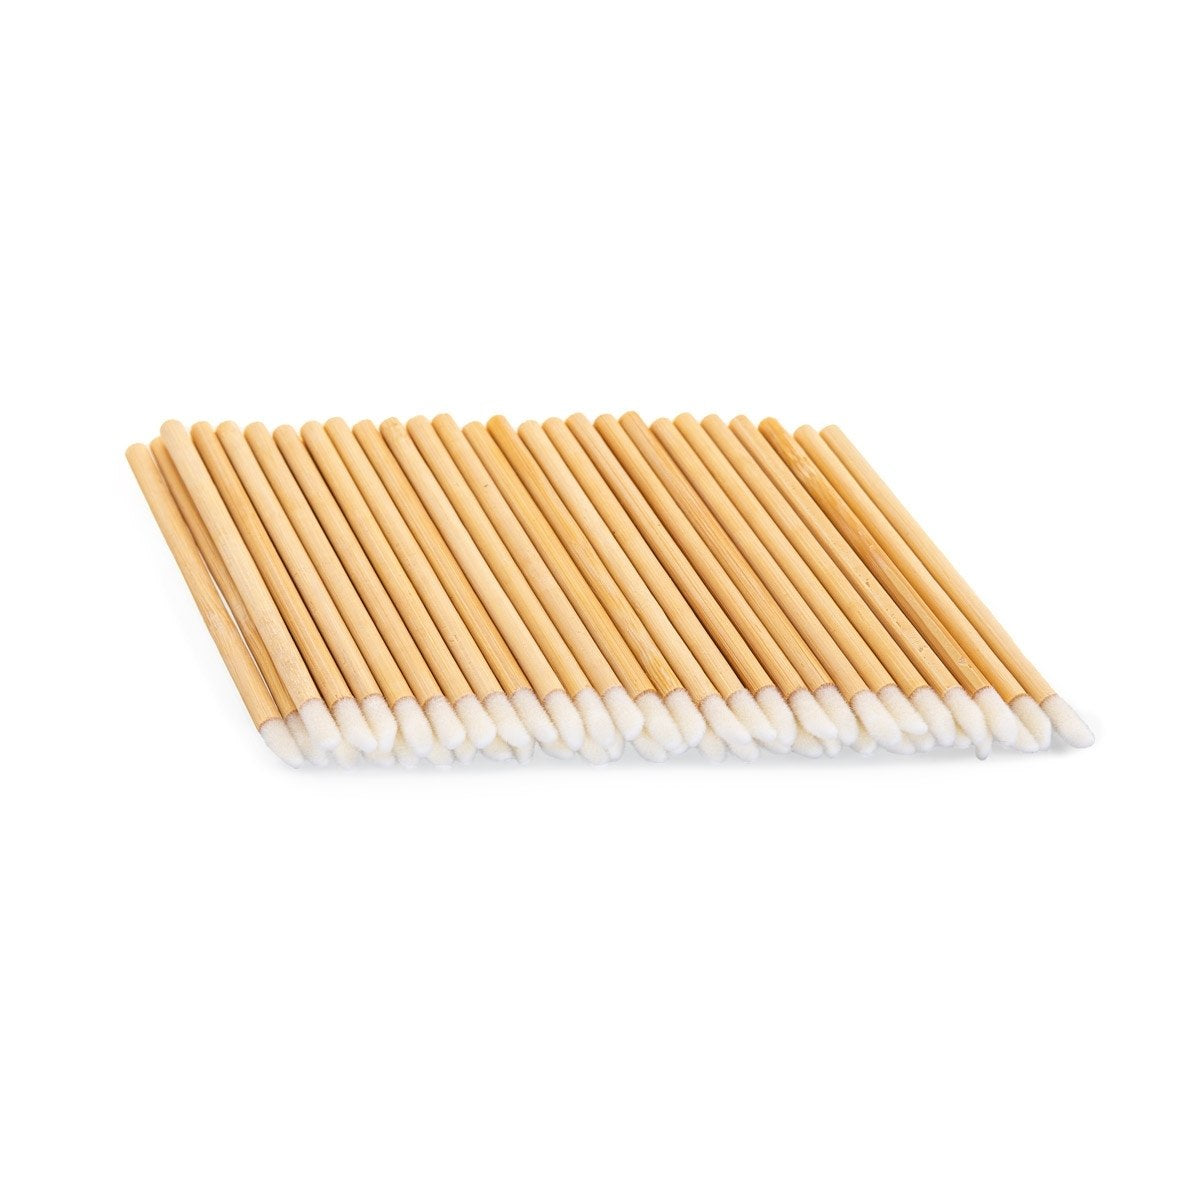 Bamboo Applicator Wands for Eyelash Extensions in White